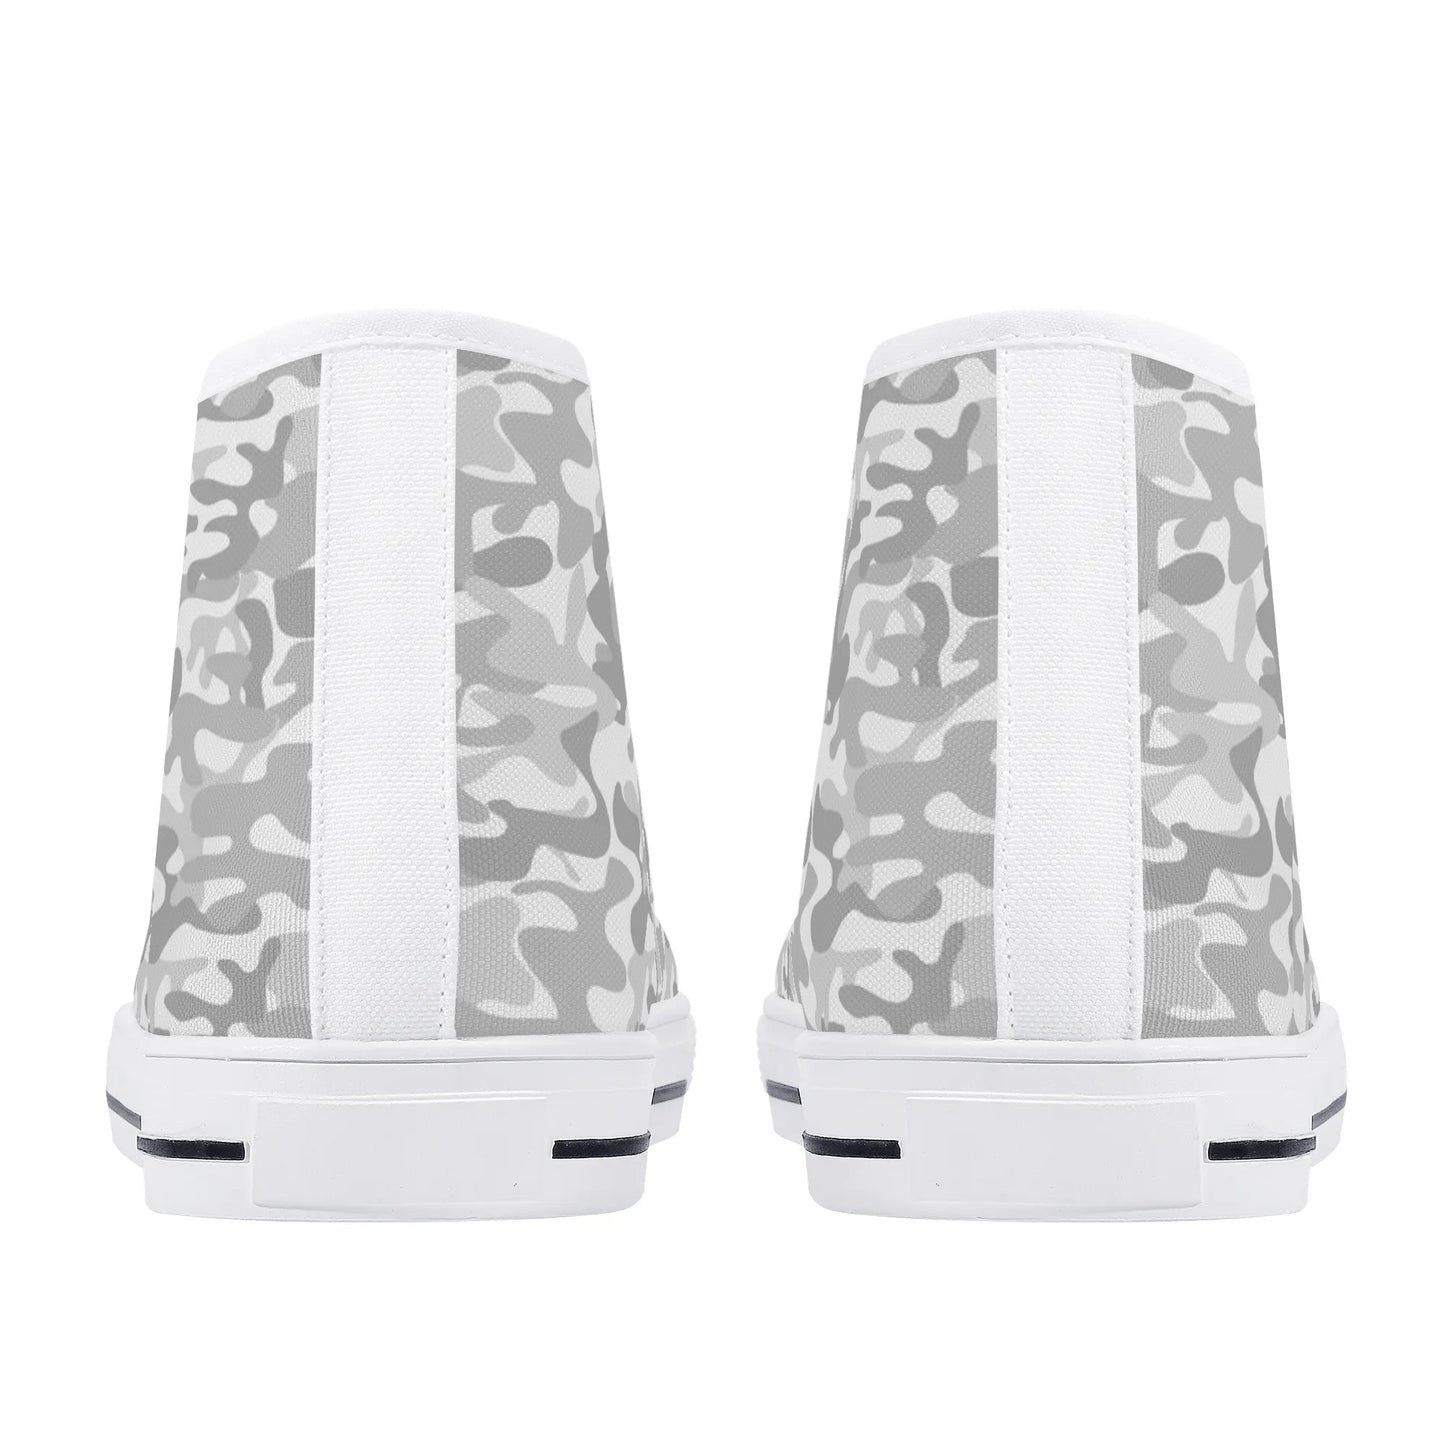 White Camo Women High Top Shoes, Camouflage Lace Up Sneakers Footwear Canvas Streetwear Ladies Girls Trainers Designer Gift